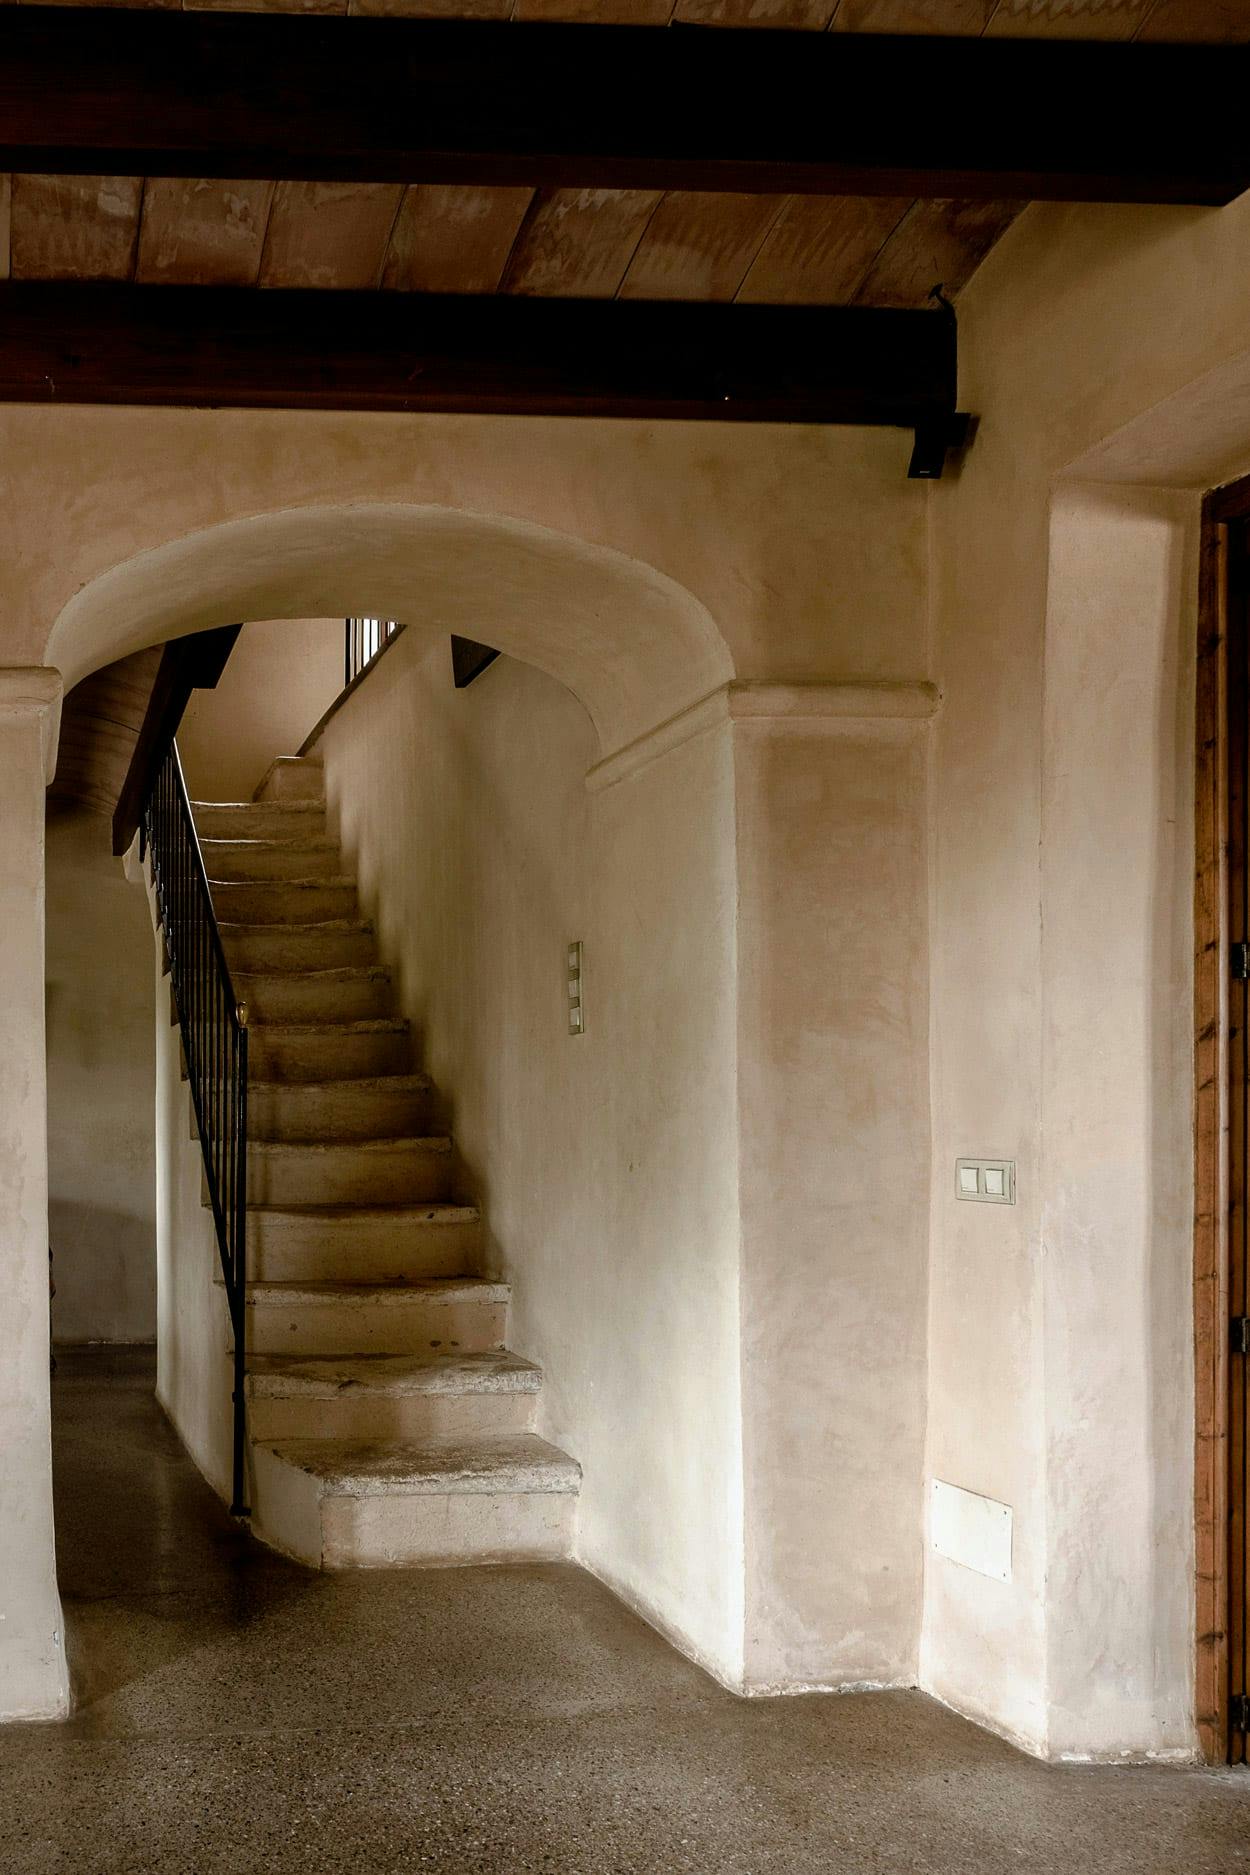 A long, narrow, and empty hallway with a staircase leading up to a doorway is depicted in the image.